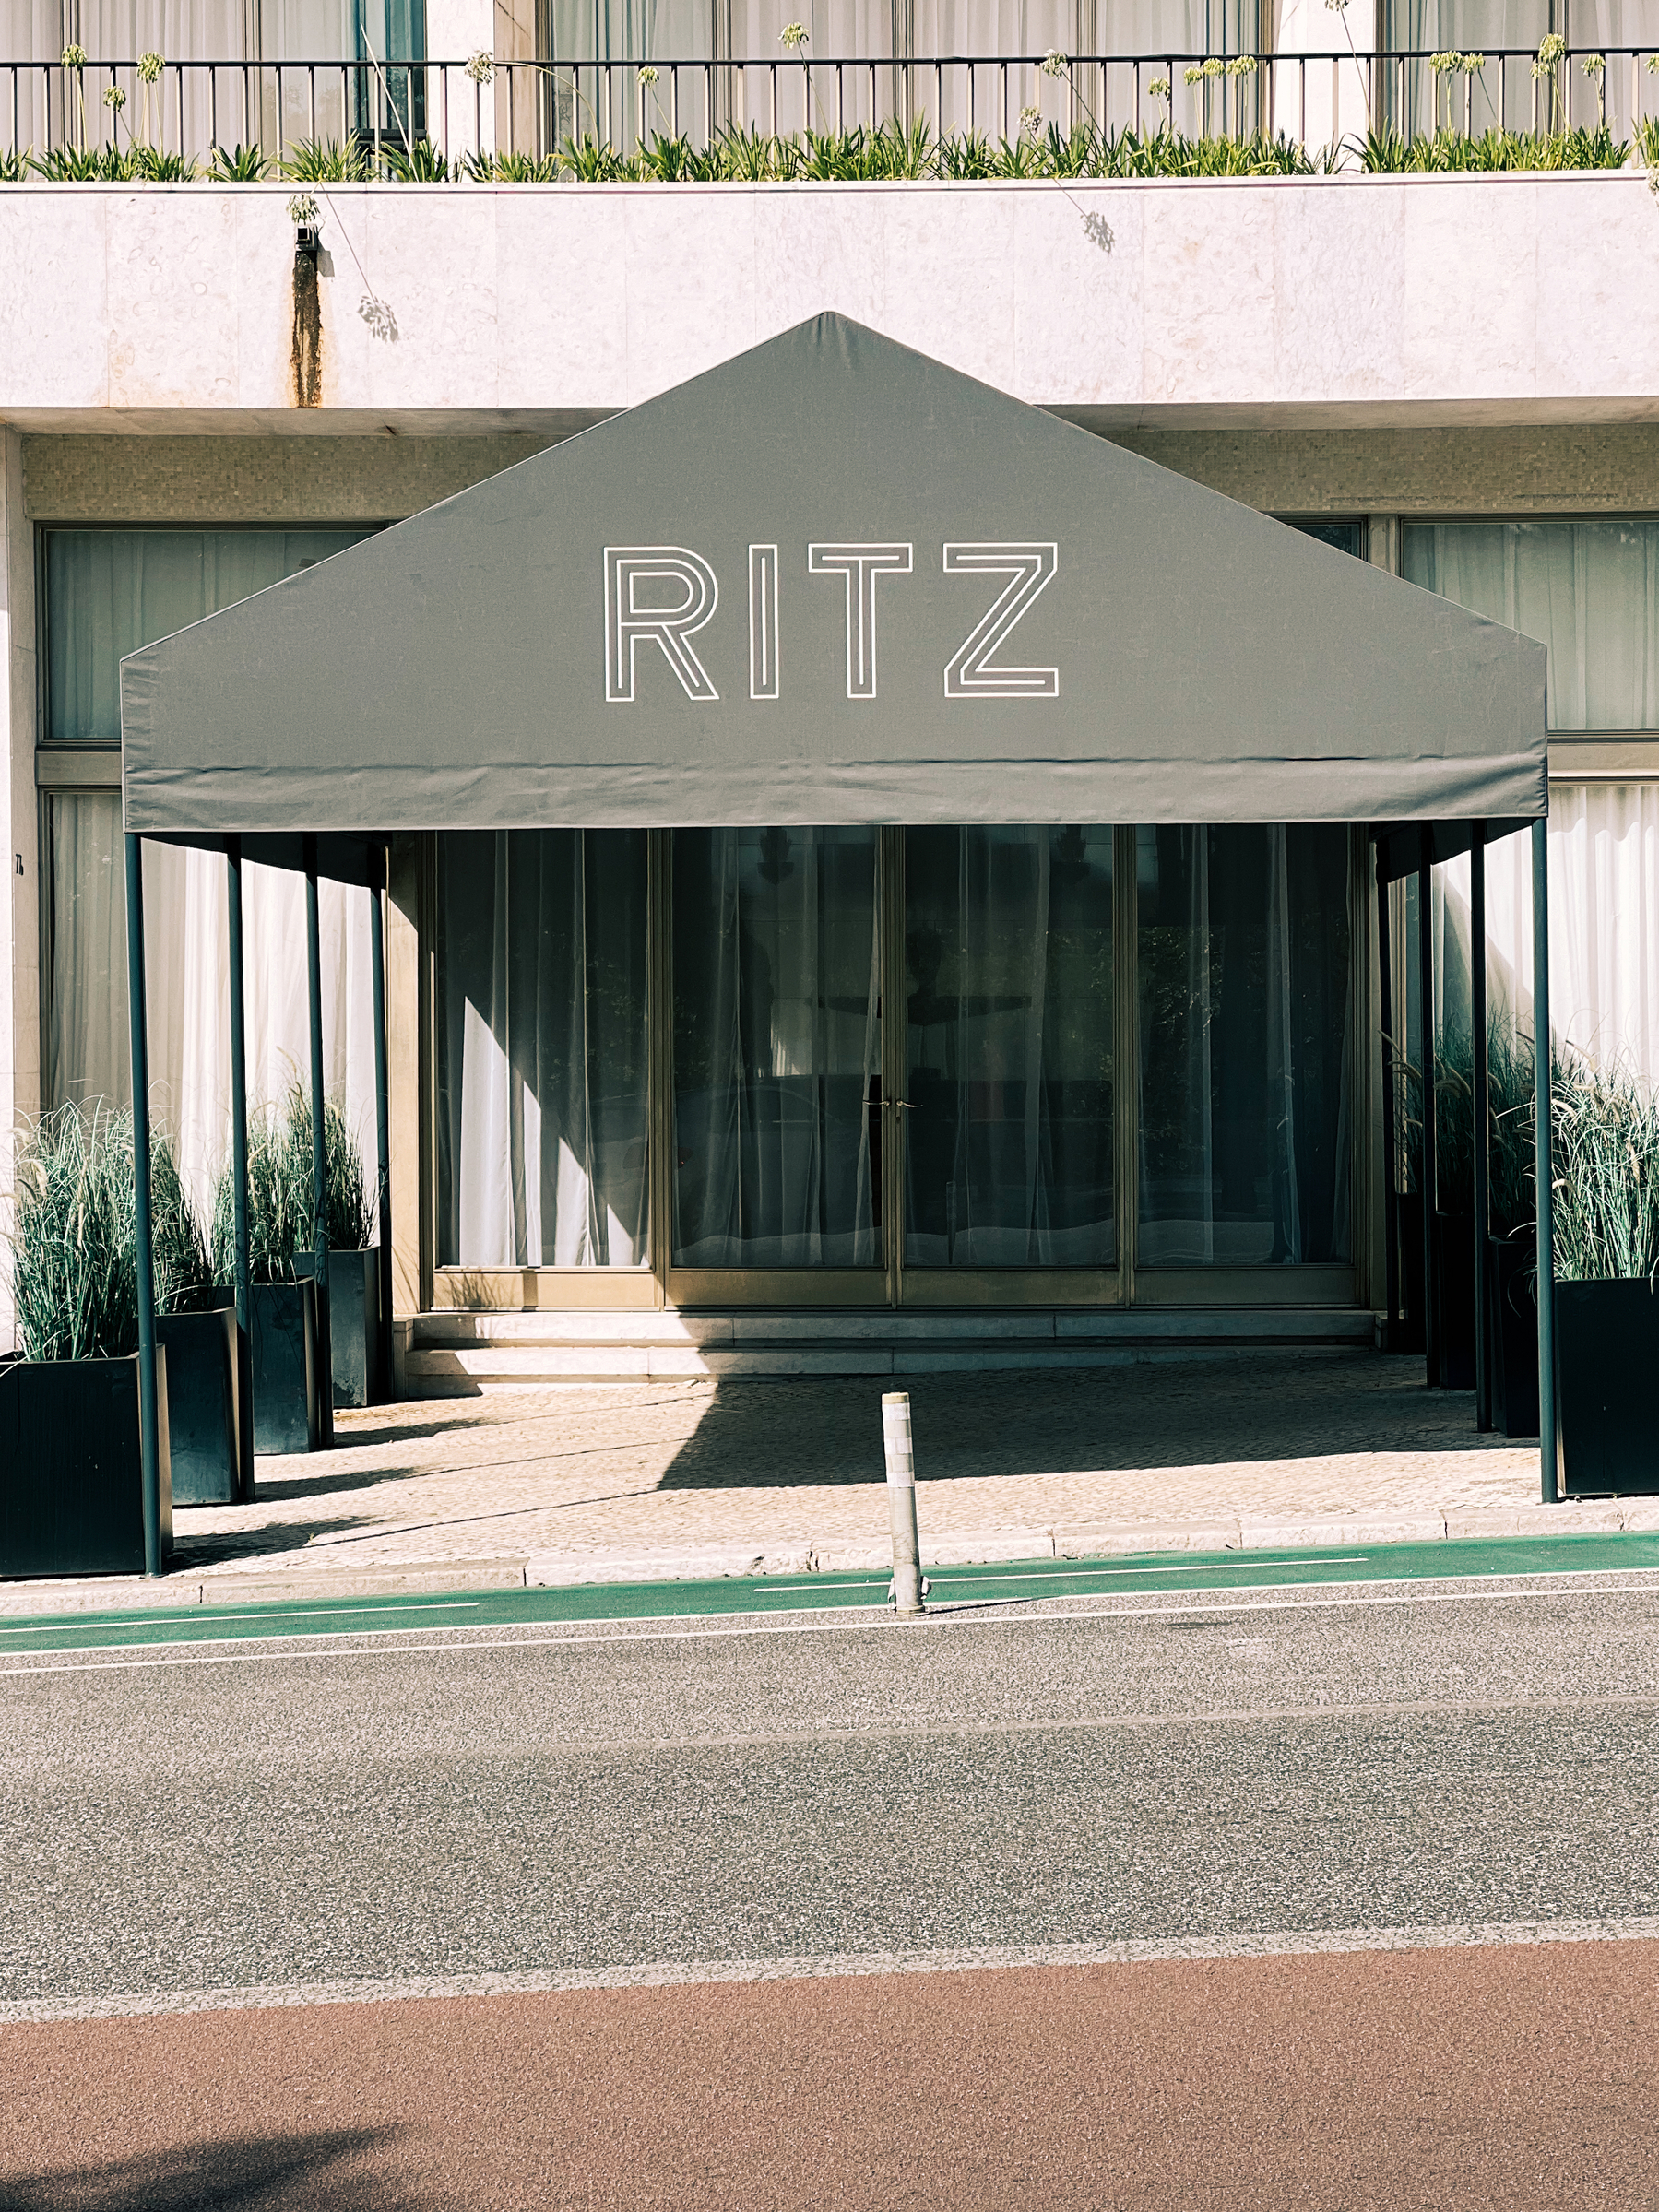 Back entrance to the Ritz.